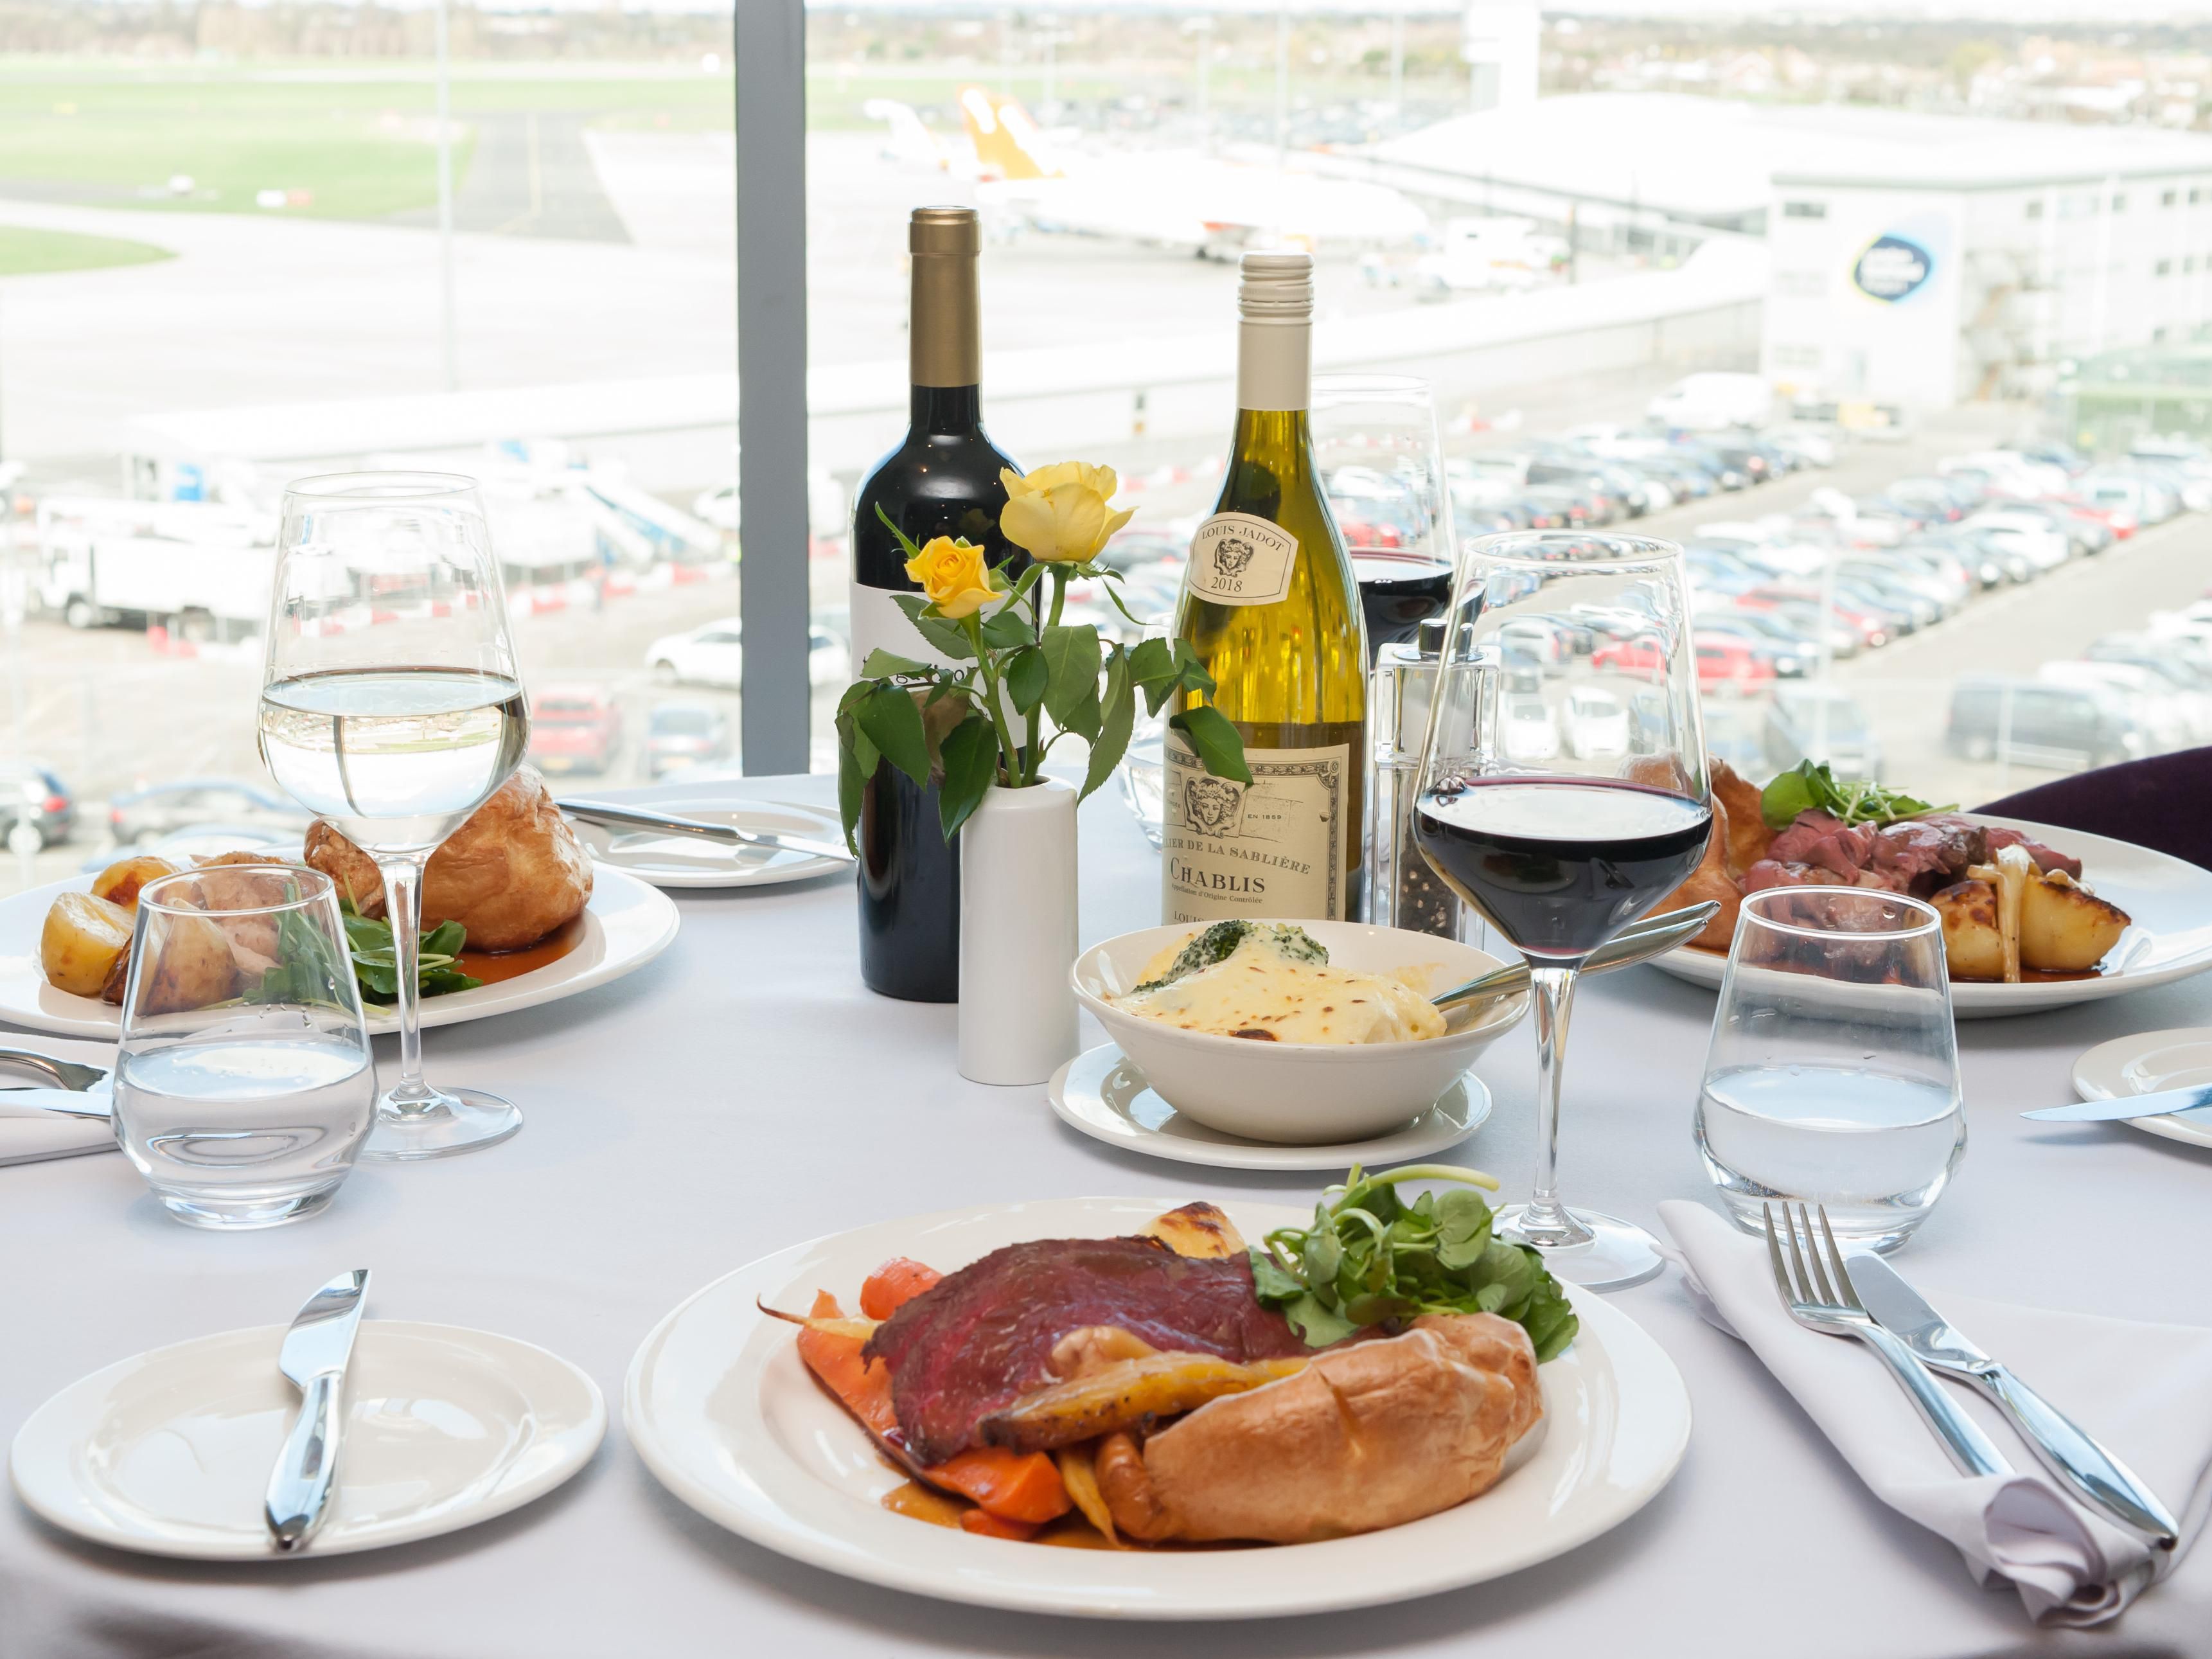 Situated just a short walk from Southend Airport train station and with ample free on-site car parking, the fully soundproofed rooftop restaurant & bar offers great food, a great atmosphere and wonderful views over the runway of London Southend Airport.
